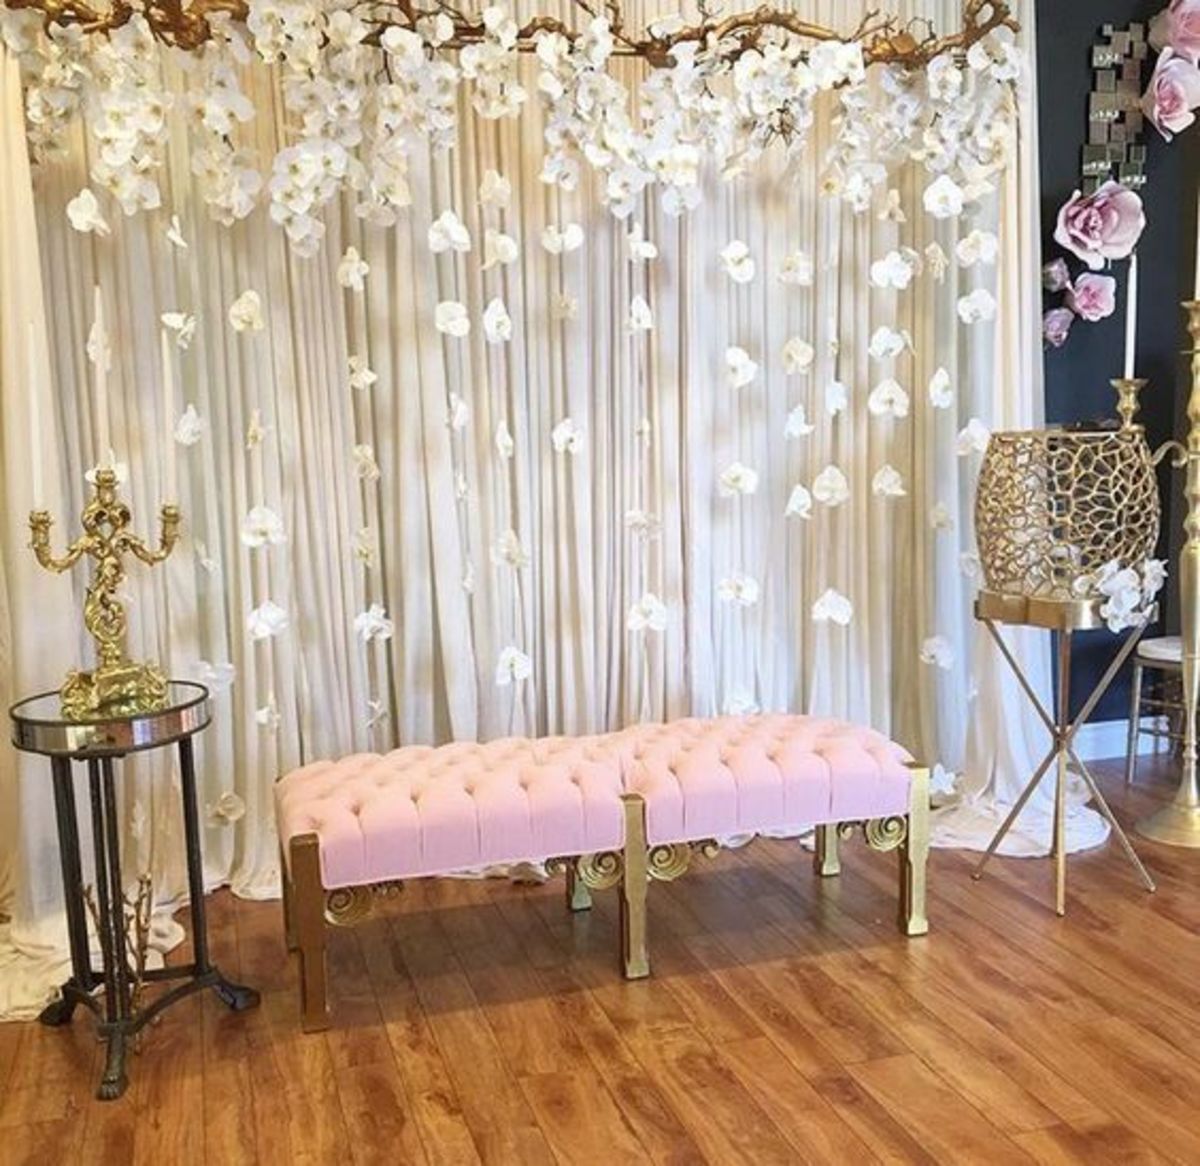 Chiffon backdrop with floral garlands